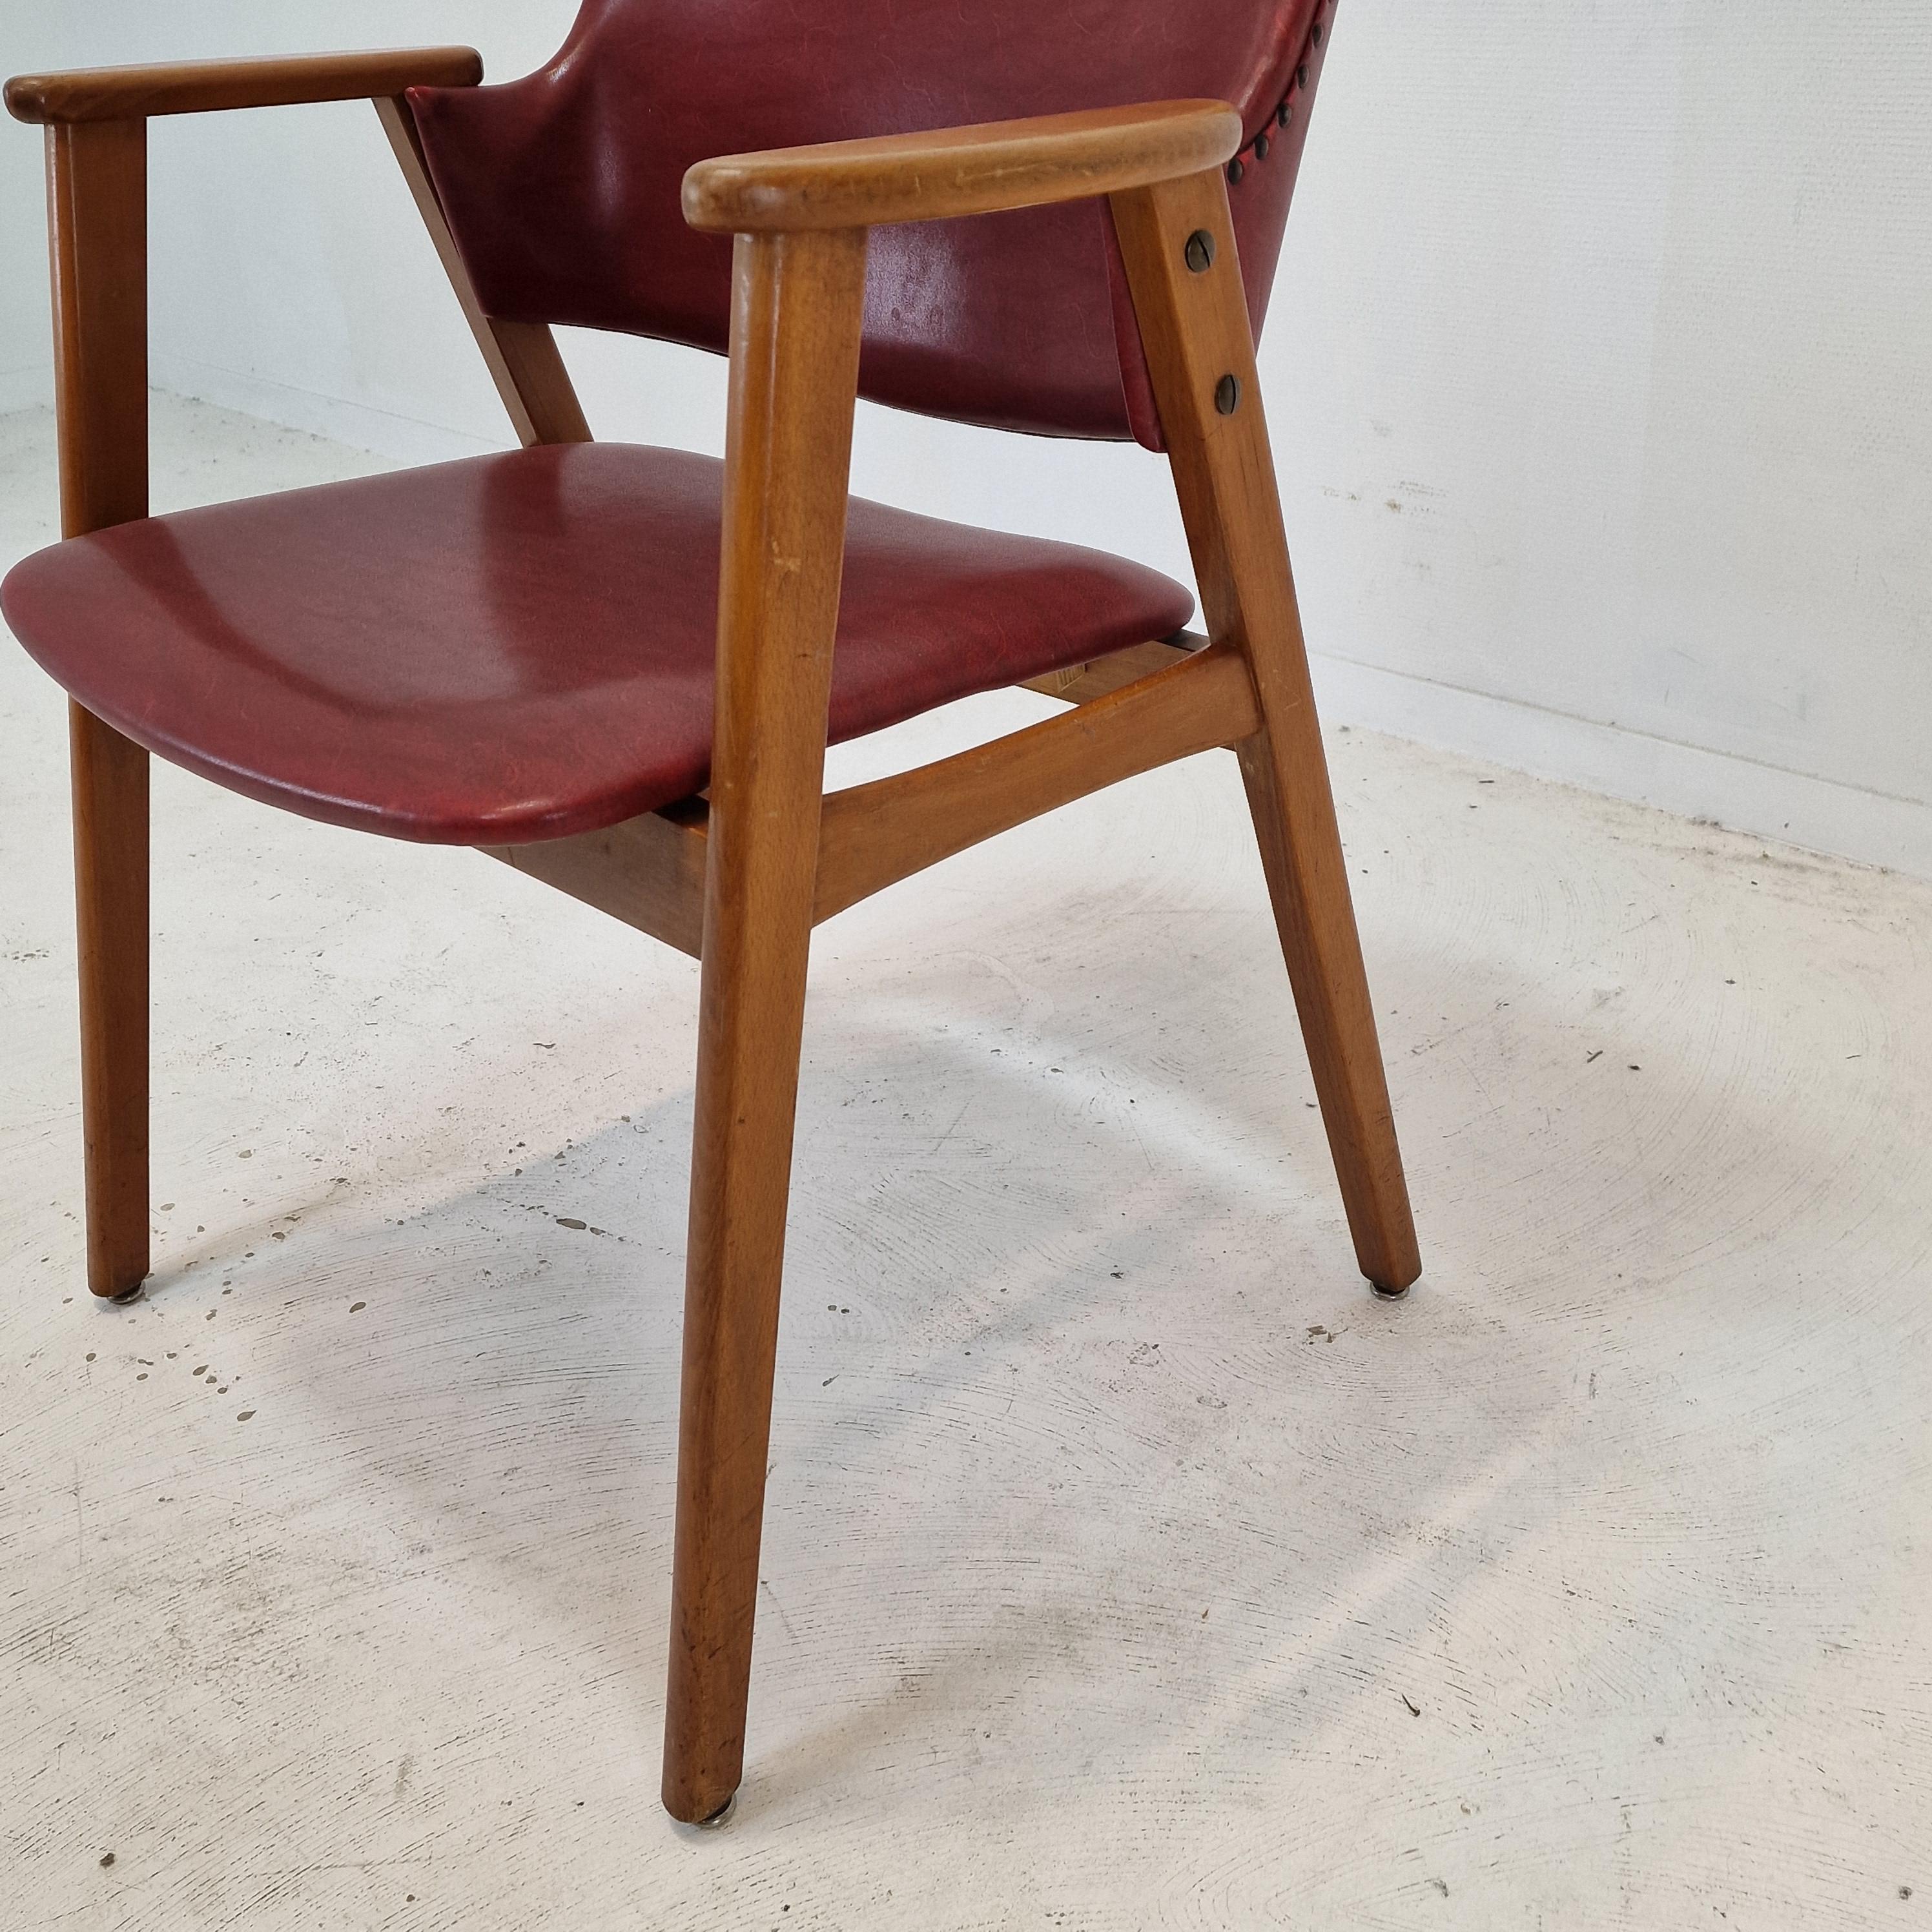 Midcentury Dining or Restaurant Chairs by Cees Braakman for Pastoe, 1950s For Sale 4